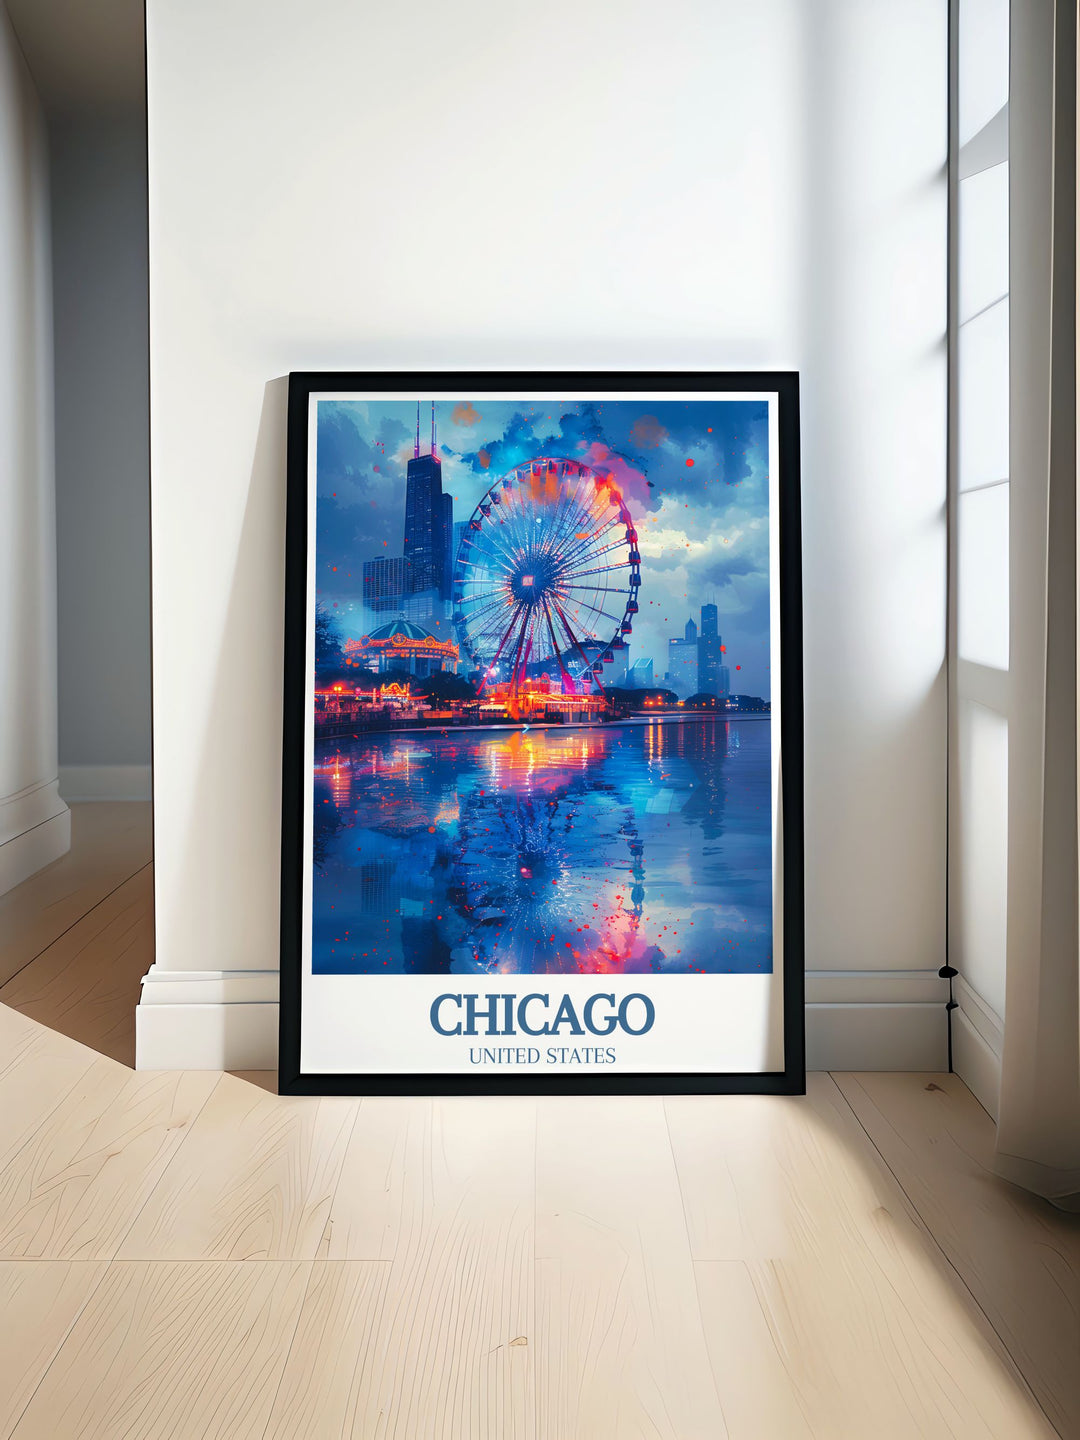 Capture the essence of Chicago with this stunning wall art print, featuring Navy Piers lively activities and architectural wonders. The iconic Centennial Wheel is beautifully illustrated in this travel poster, ideal for enhancing any room with urban sophistication.